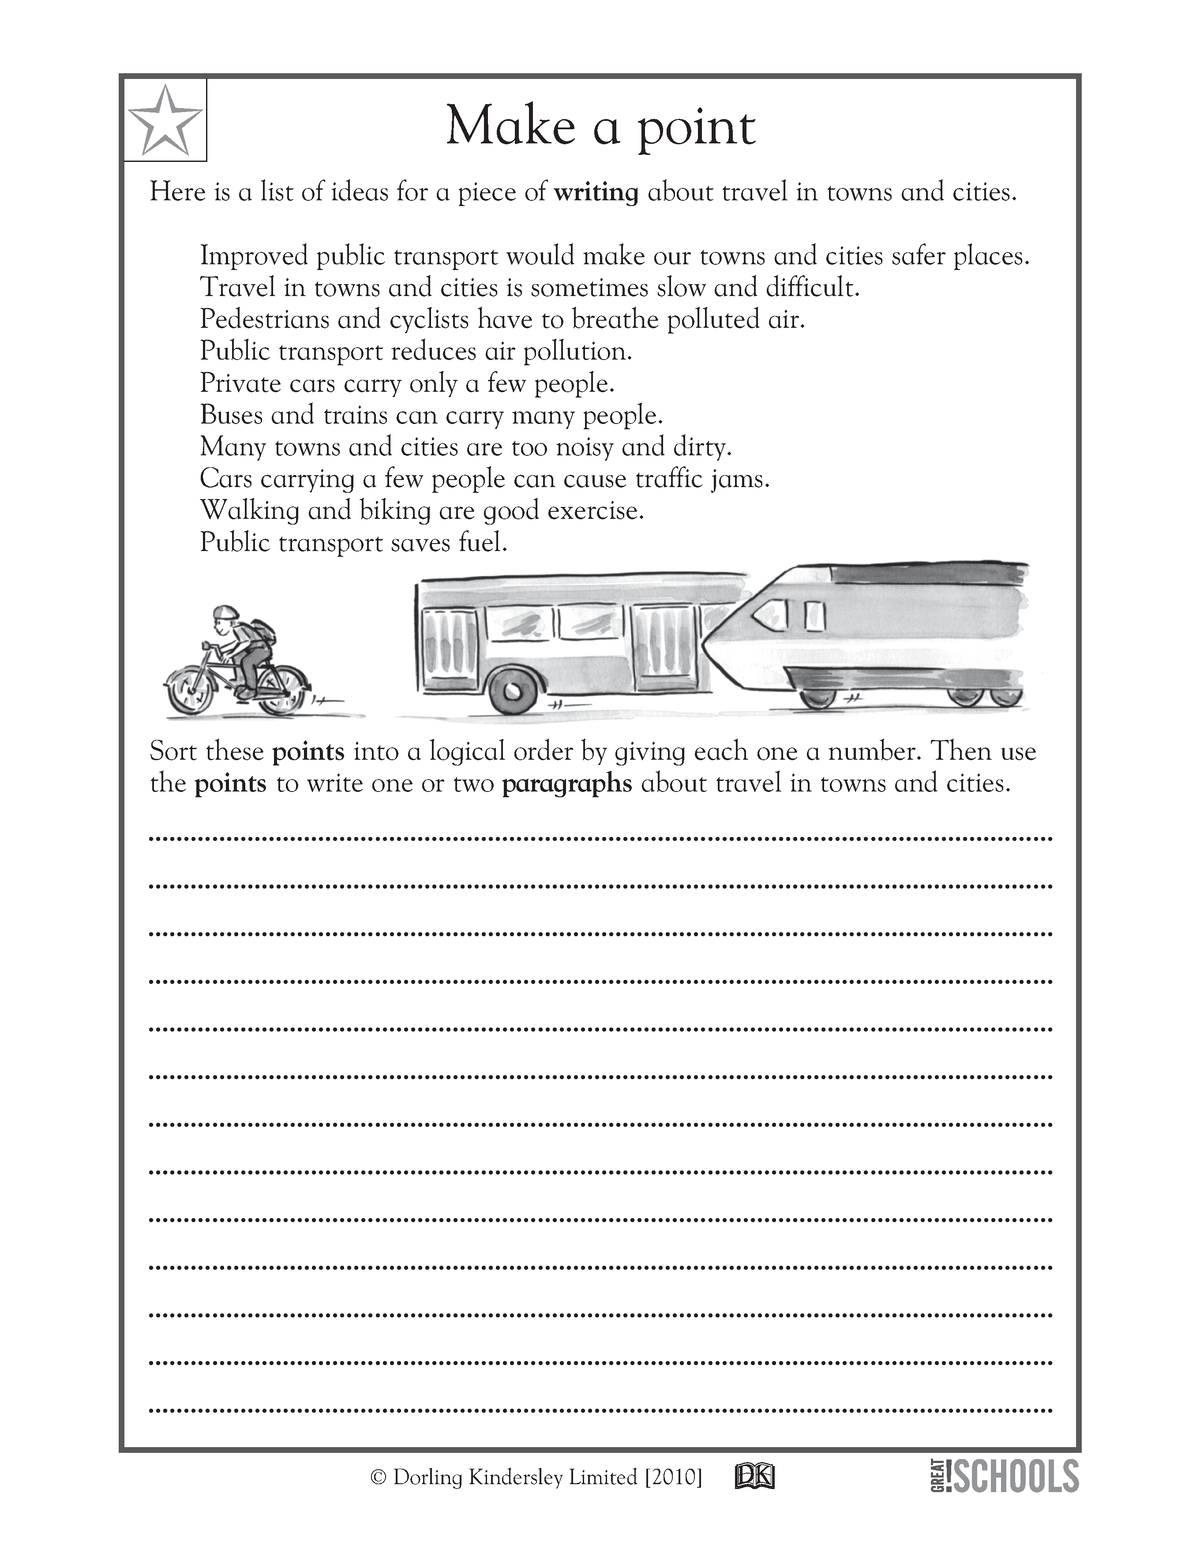 Writing Writing To Make A Point Grade 3 Dorling Kindersley Limited 2010 Make A Point